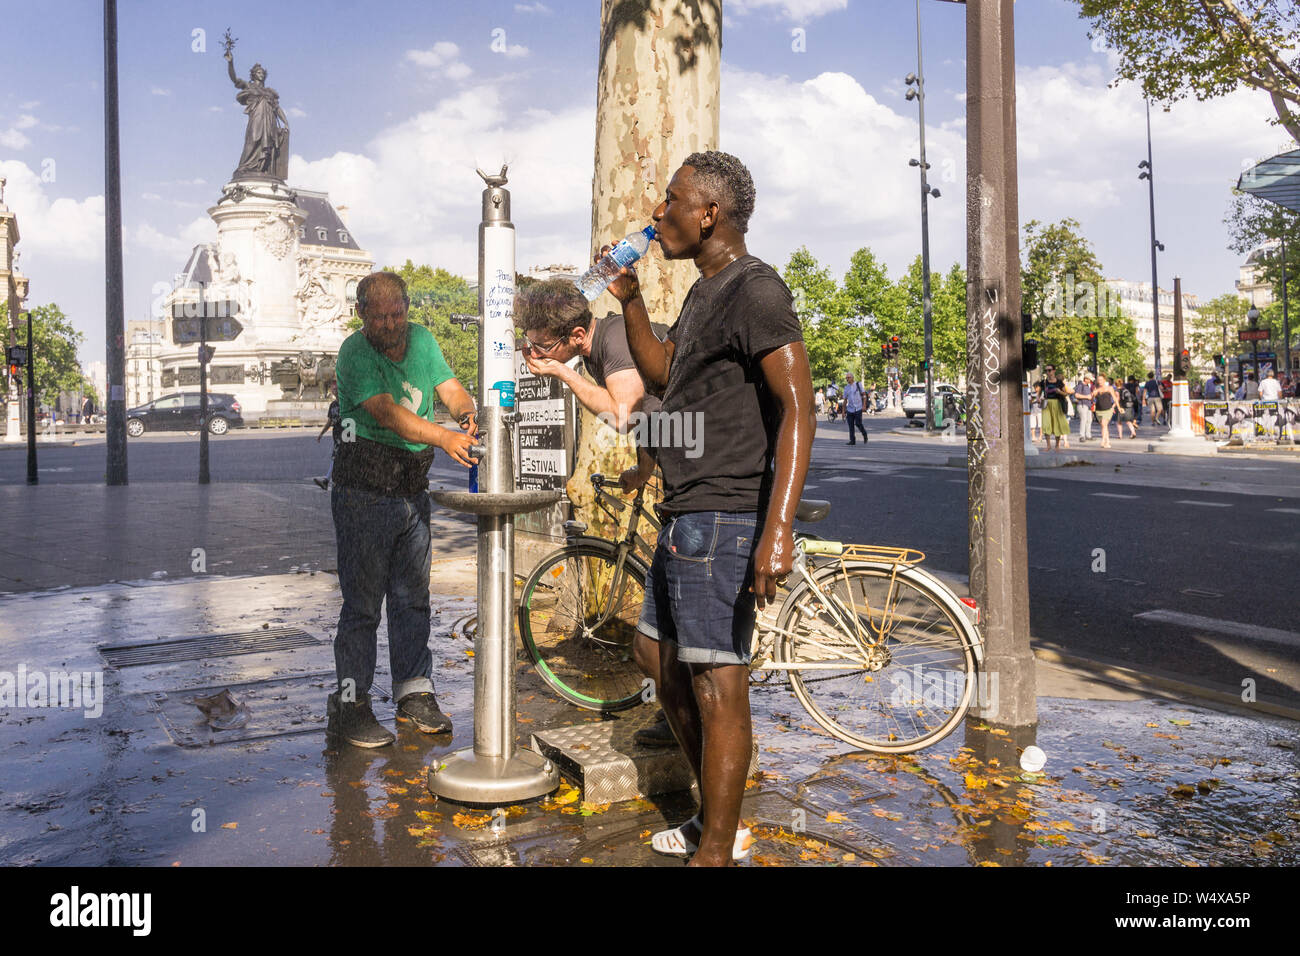 Paris heat wave 2019 - People drinking water to cool off on an extremely hot day in Paris, France, Europe. Stock Photo